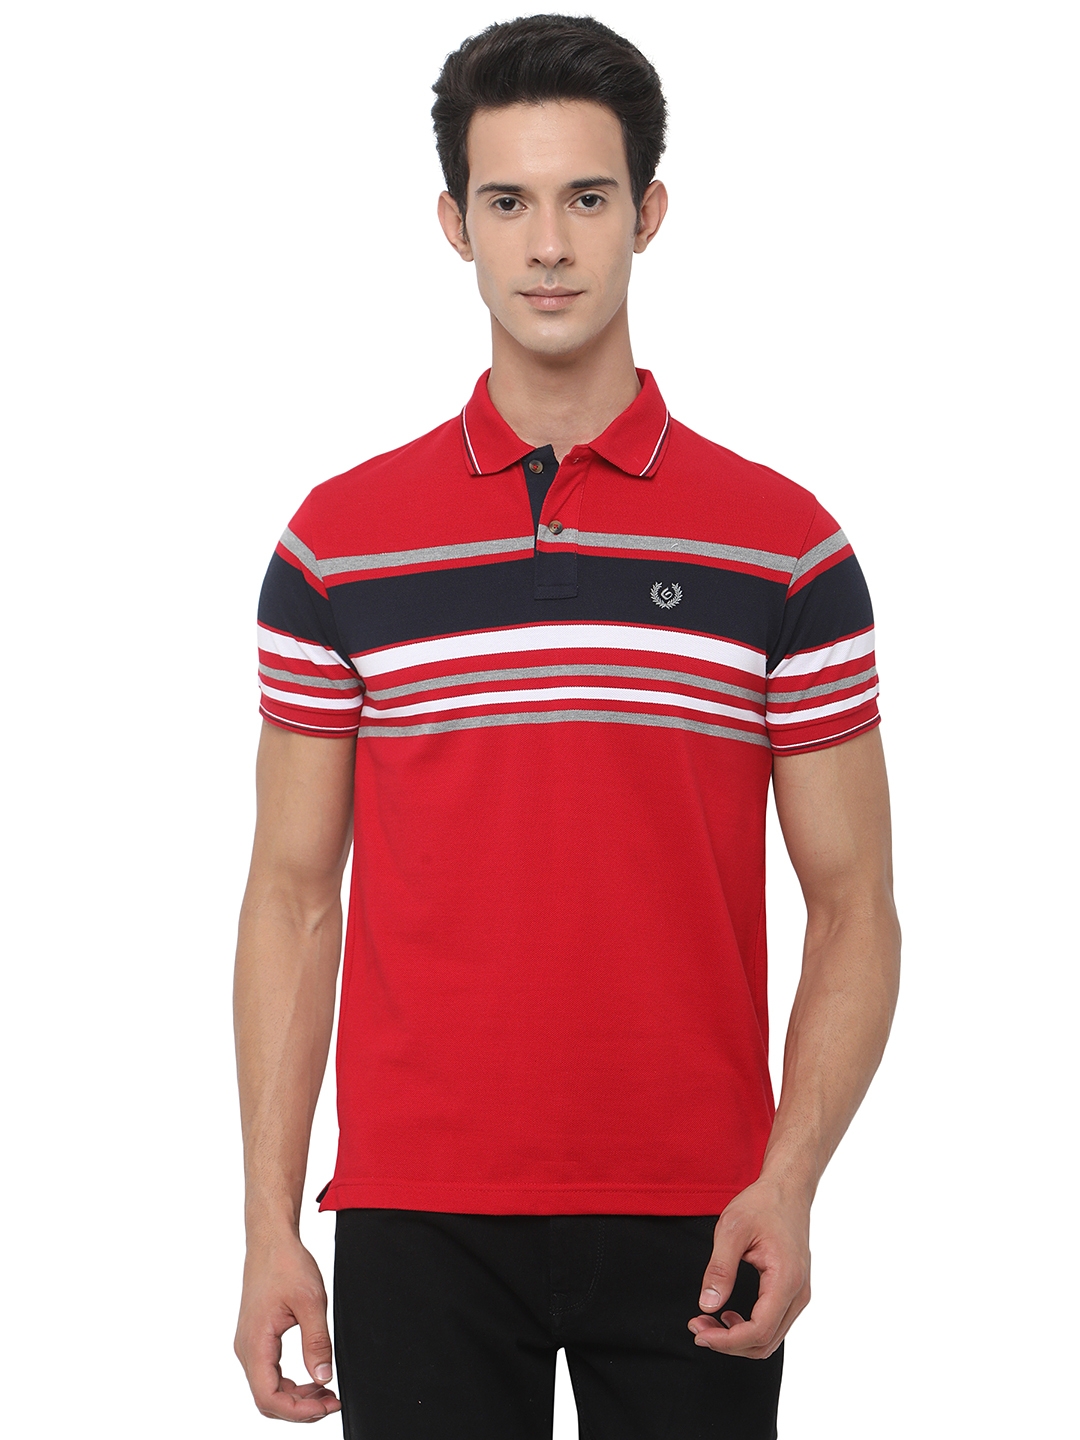 Greenfibre | Tomato Red Striped Slim Fit Polo T-Shirt | Greenfibre